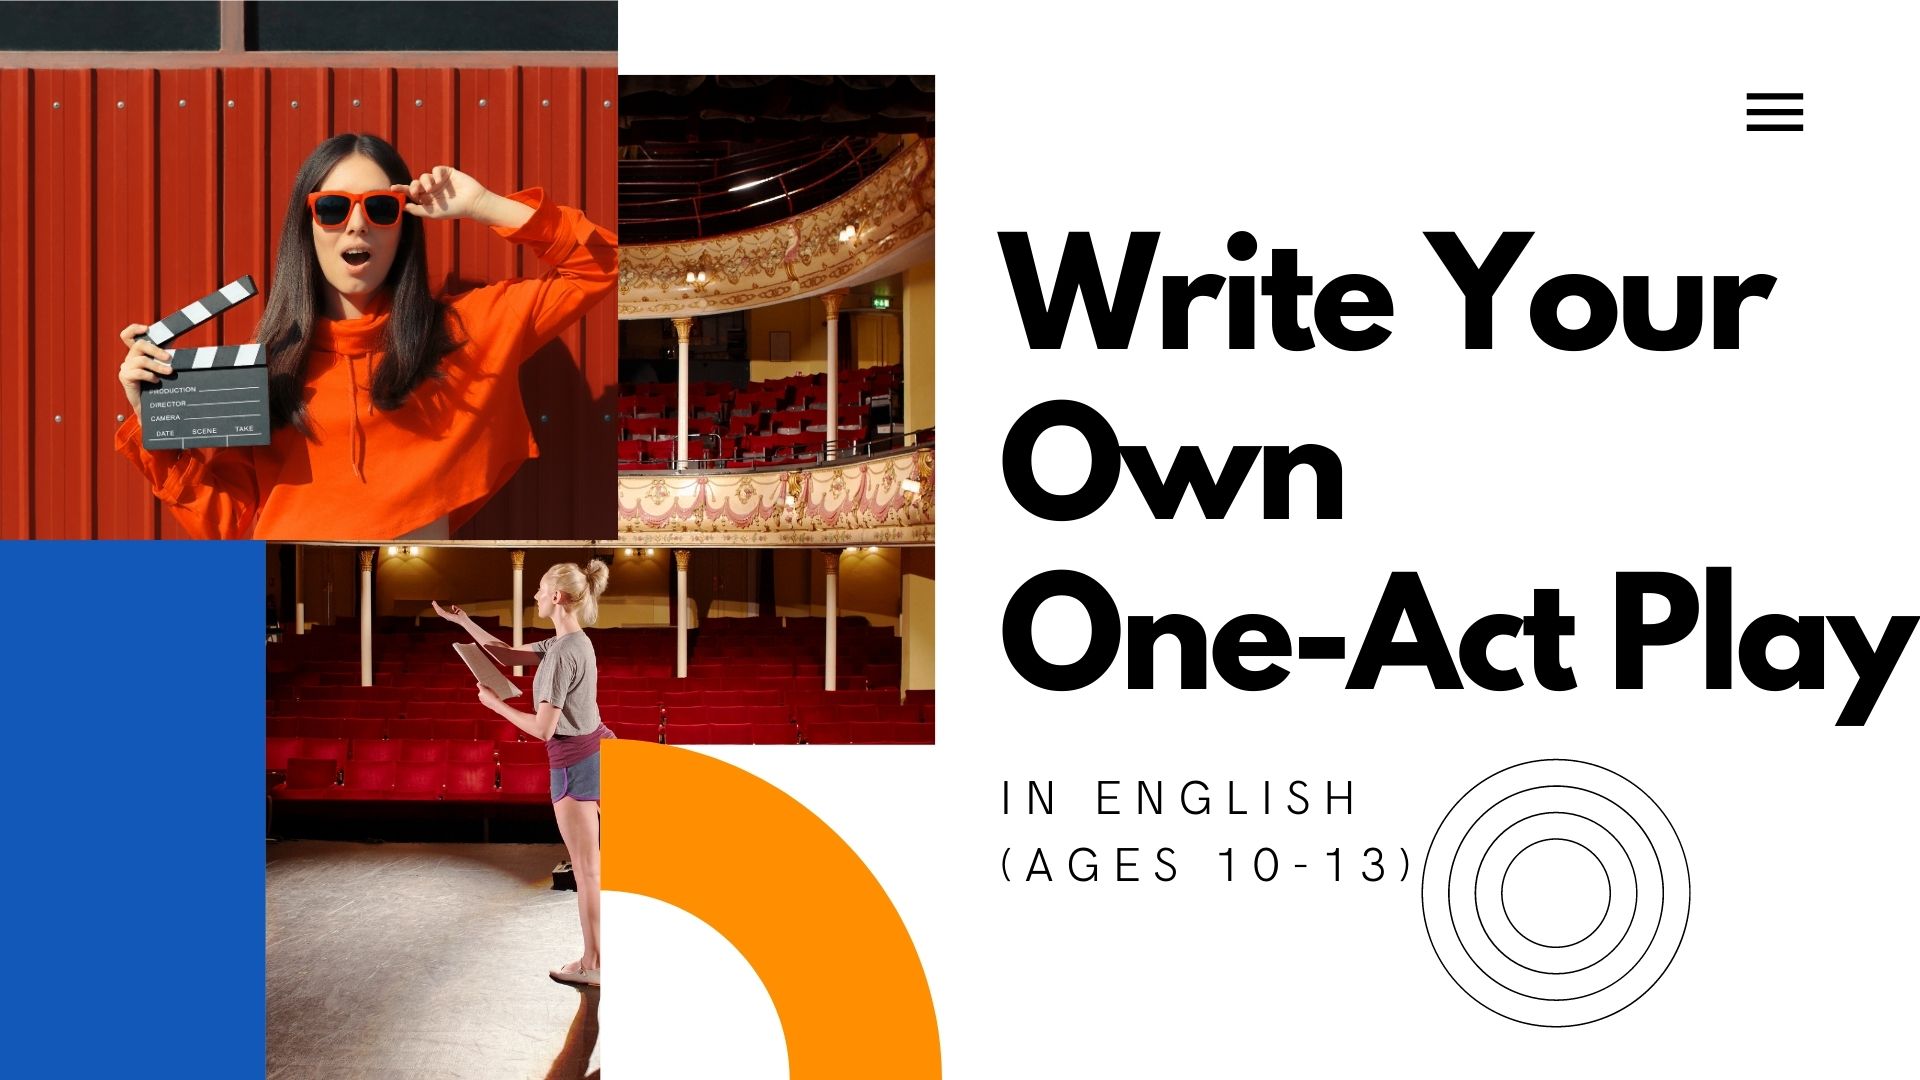 Write Your Own One-Act Play